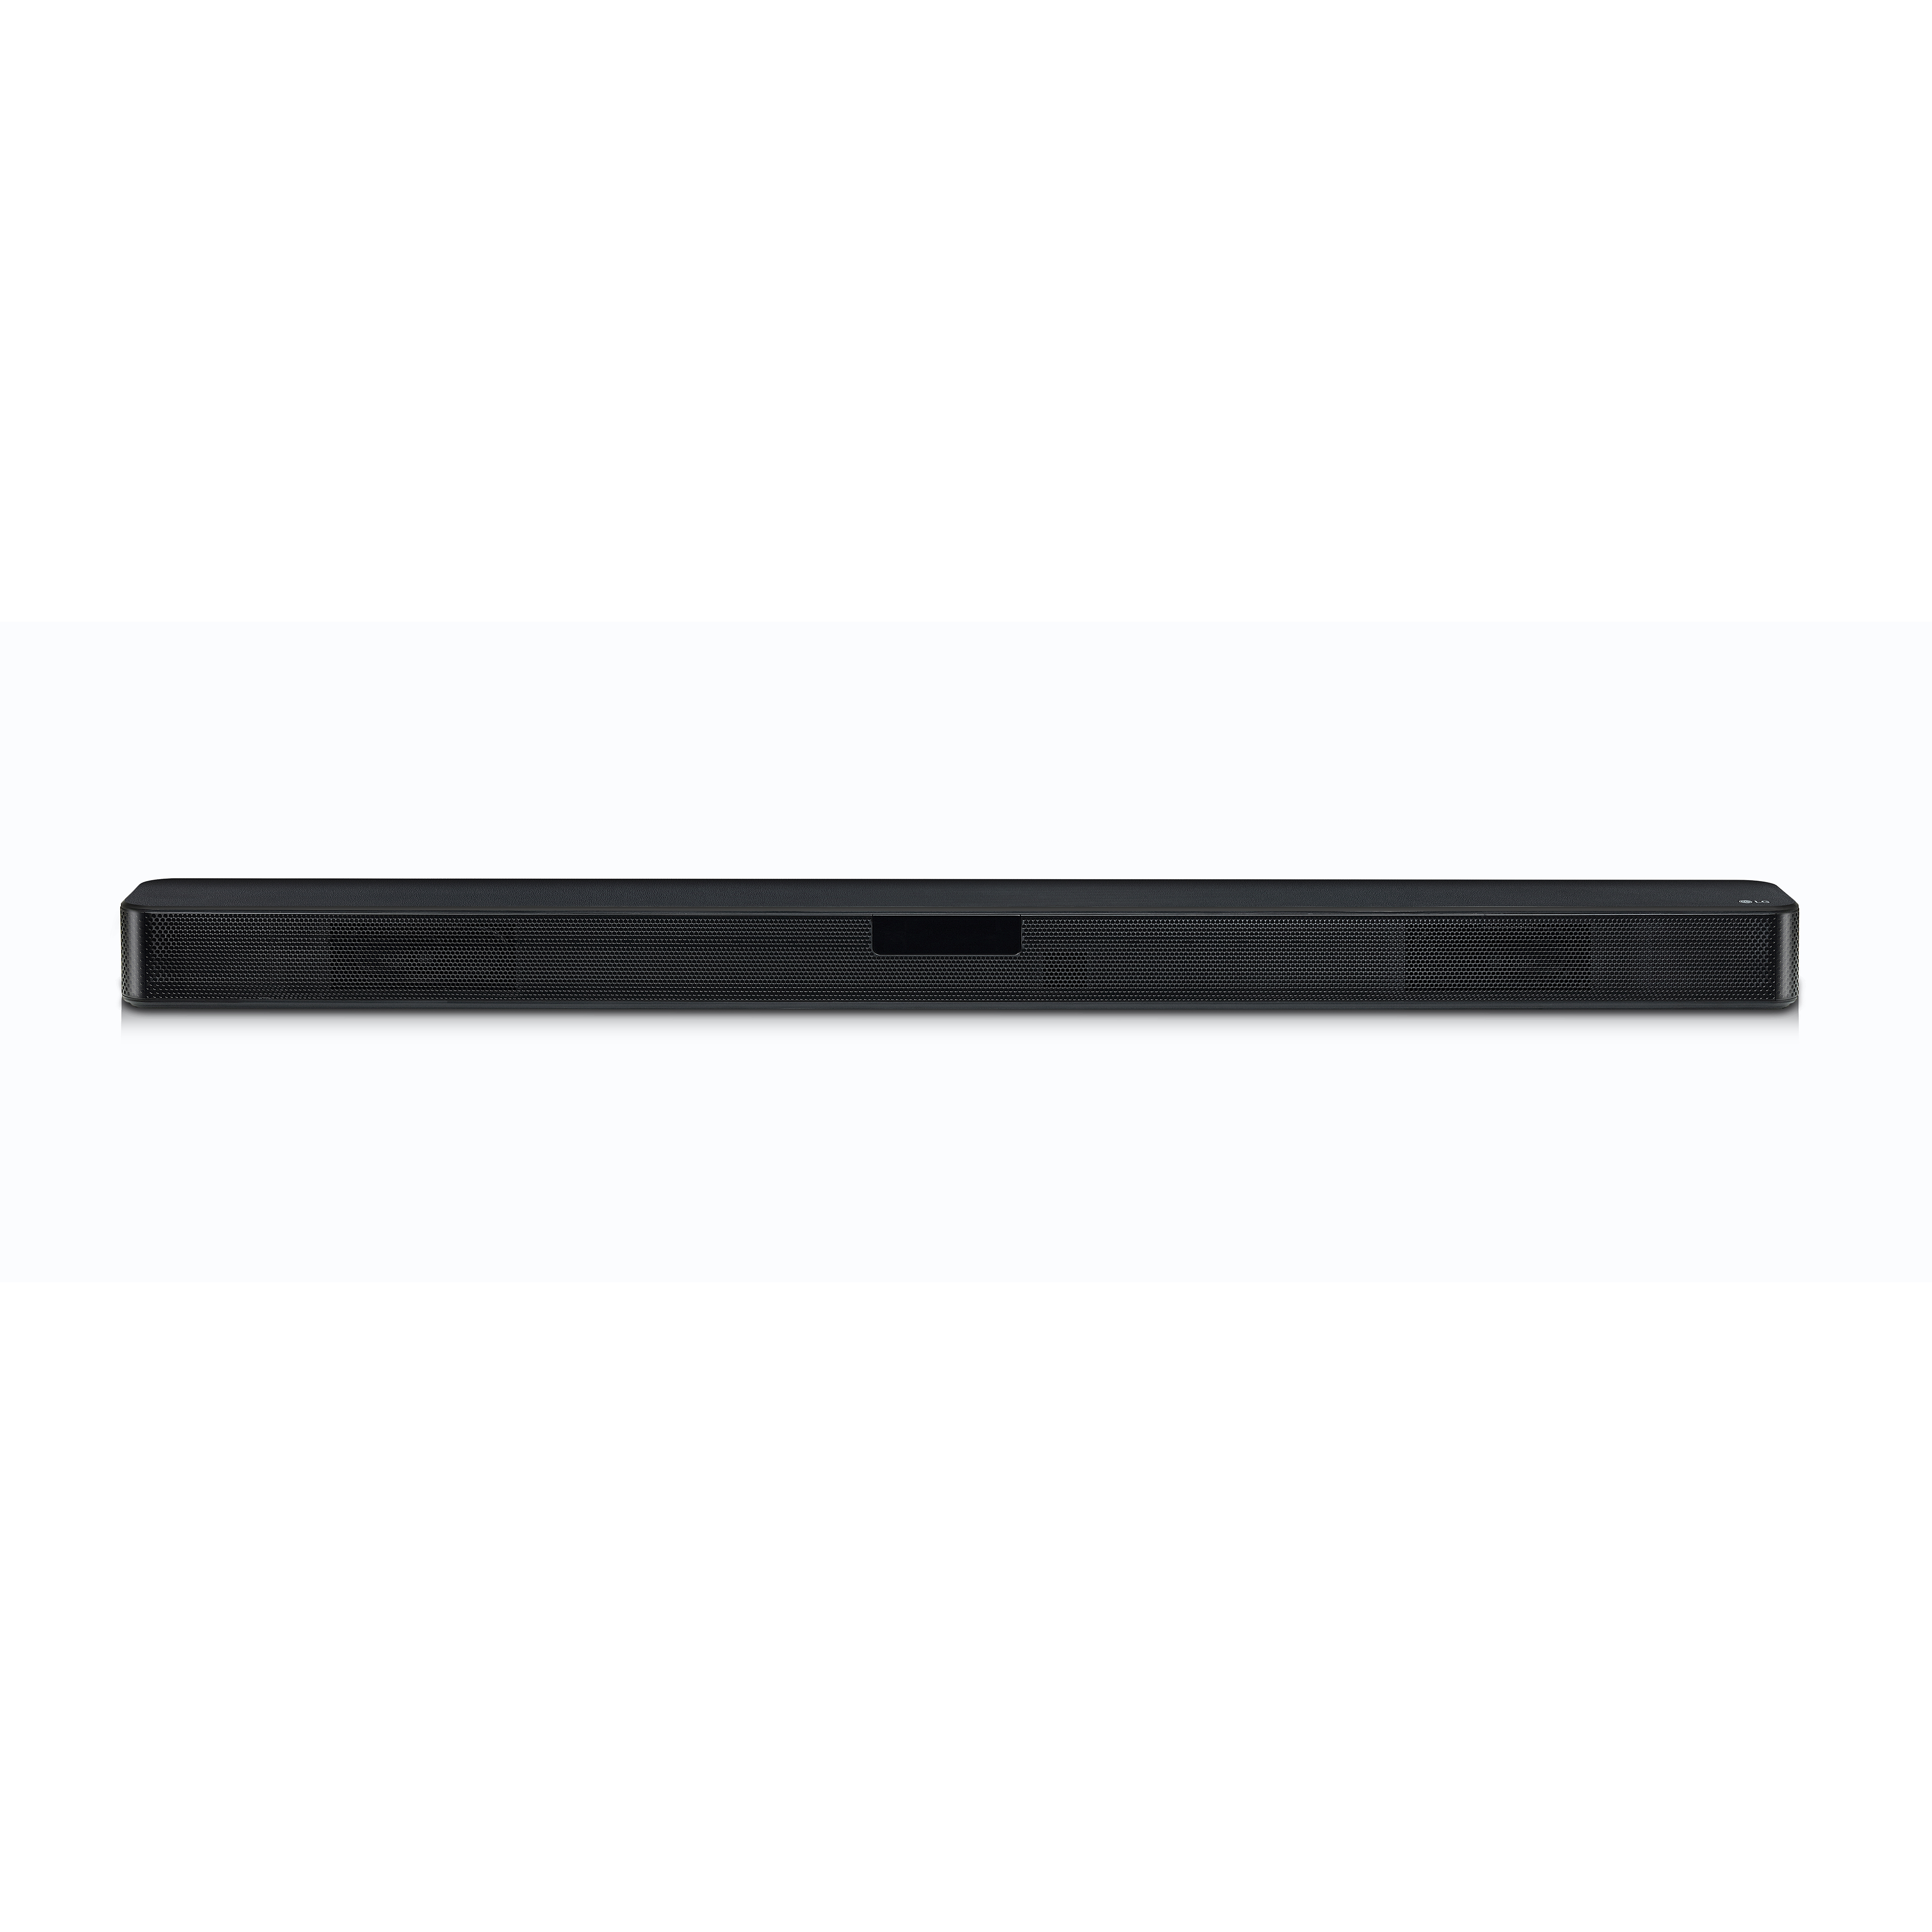 LG 3.1.2 Channel 440W High Res Audio Soundbar with Dolby Atmos® and Google Assistant Built-In - SL8YG - image 2 of 11